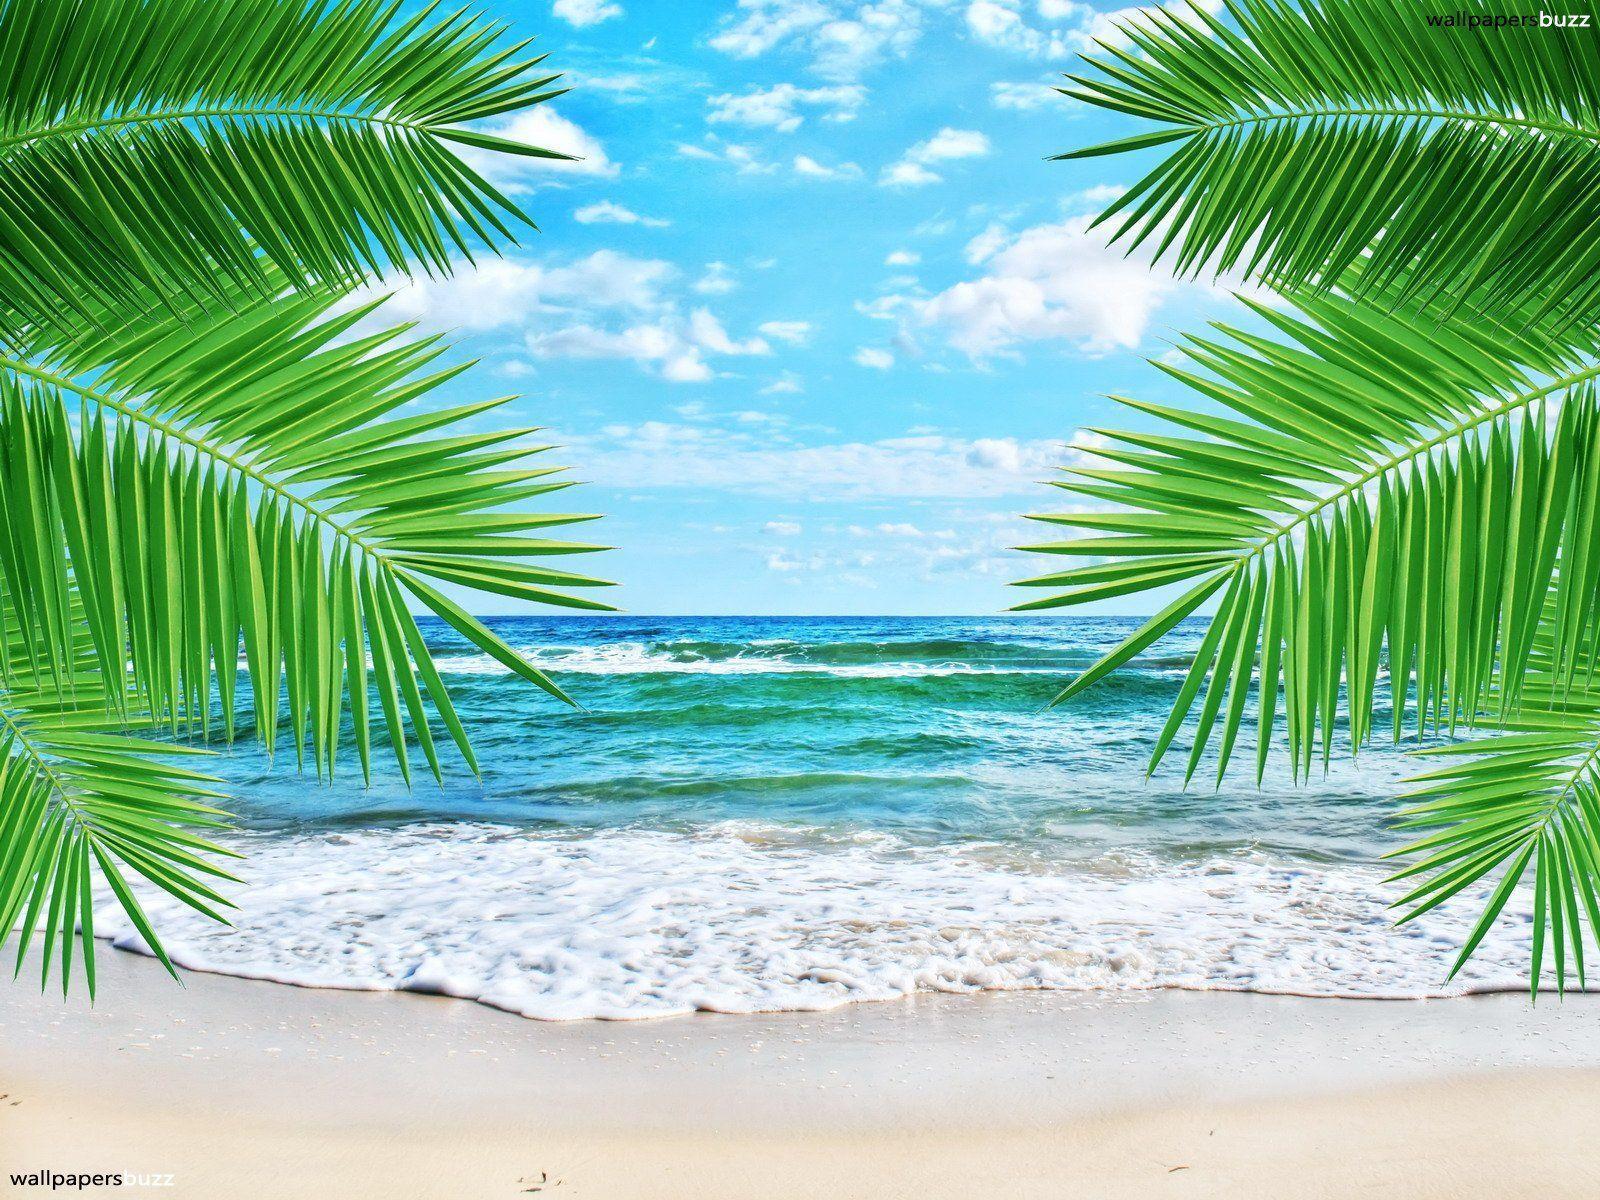 Tropical Beach Waves Wallpapers Hd Backgrounds 9 HD Wallpapers